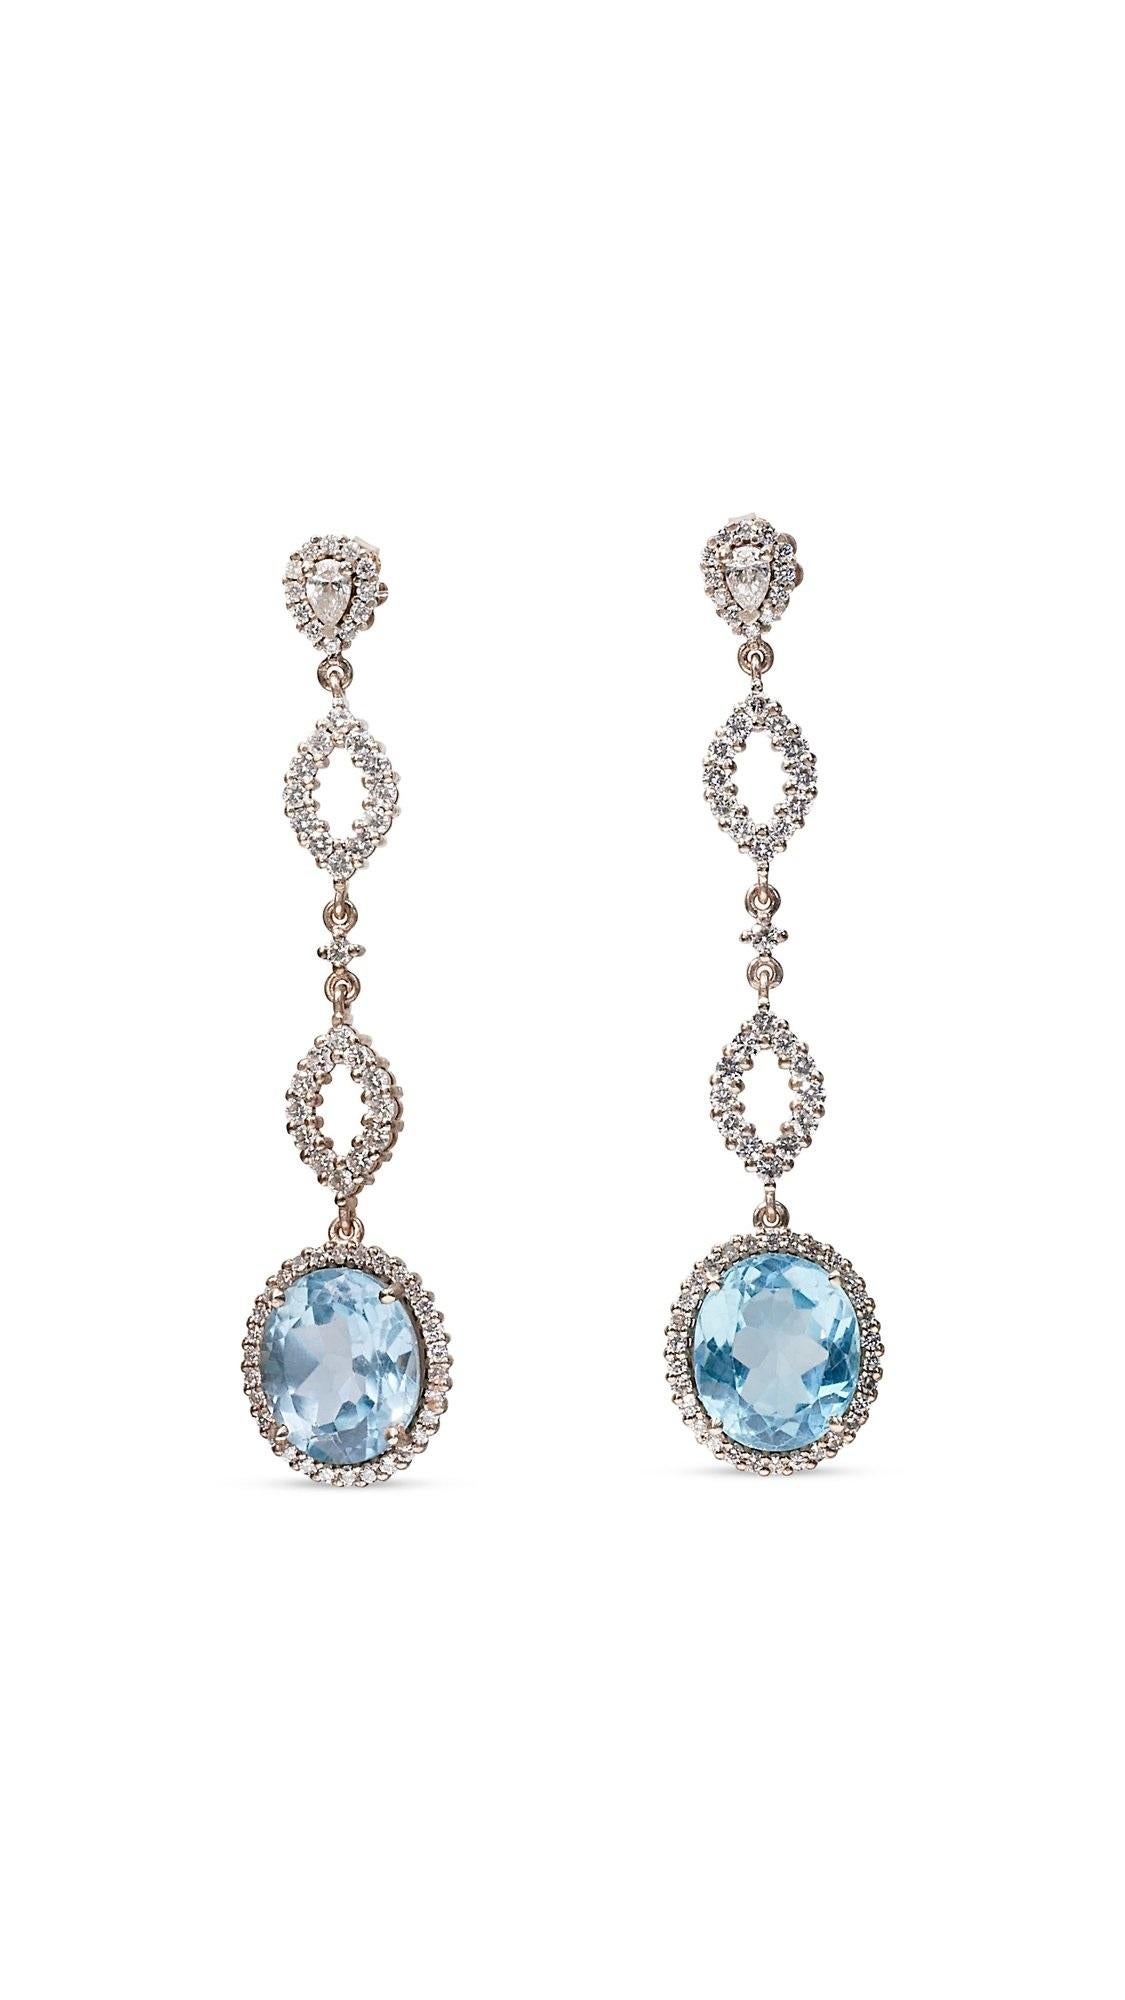 18k White Gold Drop Earrings with 17.37 ct Natural Topaz and Diamonds IGI Cert For Sale 2